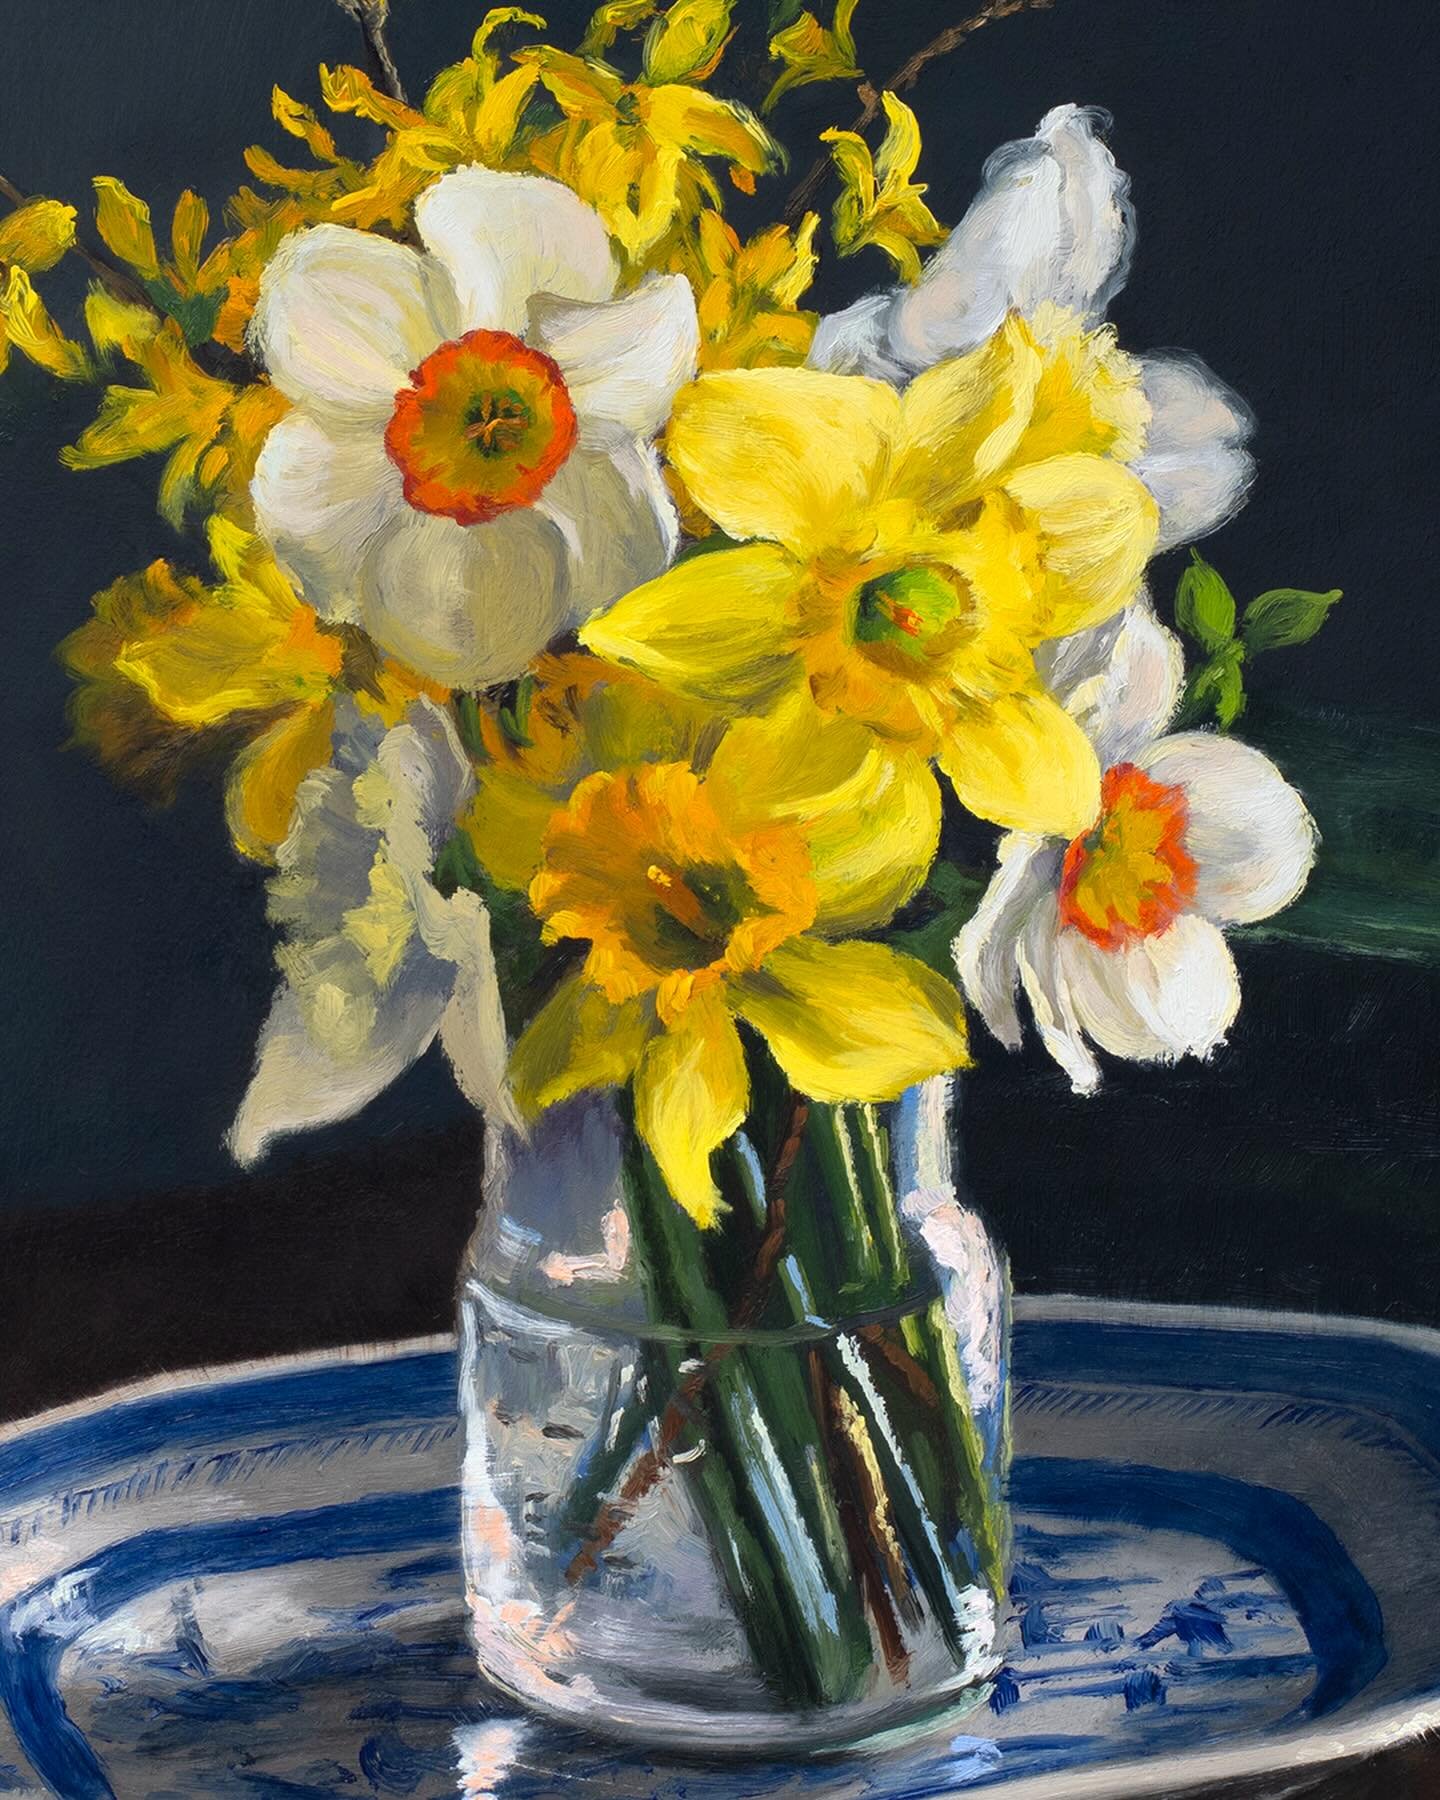 Spring is Here!  Love this painting, the four varieties of daffodils (February Gold, Ice Follies, and Narcissus Ringtone) with the forsythia 😍. ⁠
⁠
I love how the light rakes across the scene, creating highlights in the Atlas canning jar and the Blu